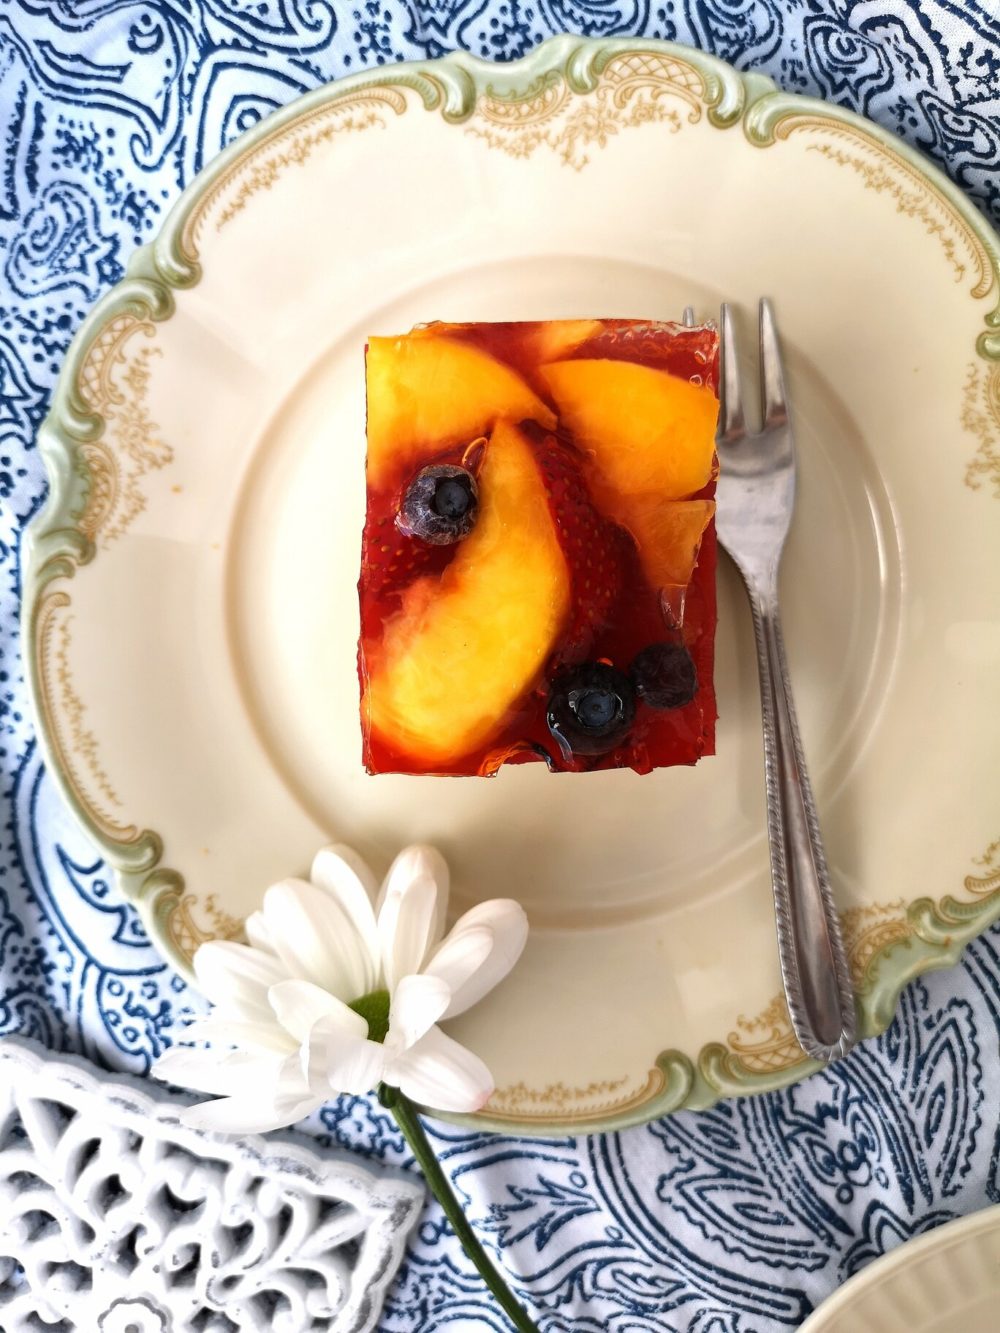 summer fruit cake bars on a white plate with a fork